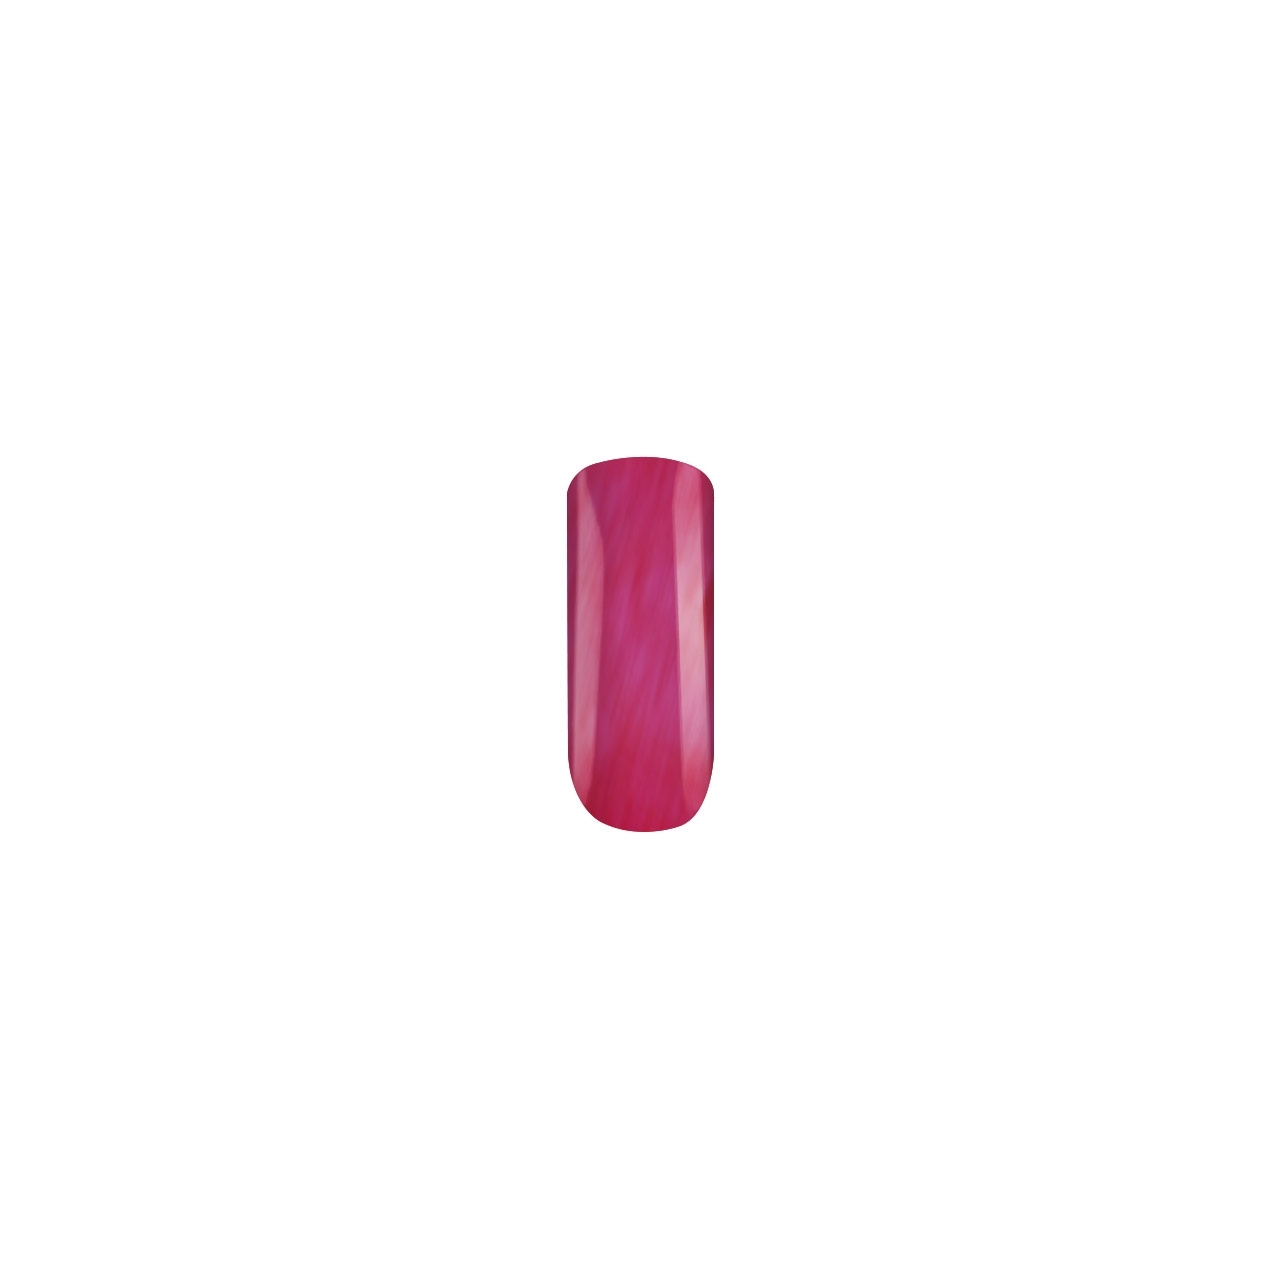 BAEHR BEAUTY CONCEPT - NAILS Nagellack candy pink flipflop 11 ml